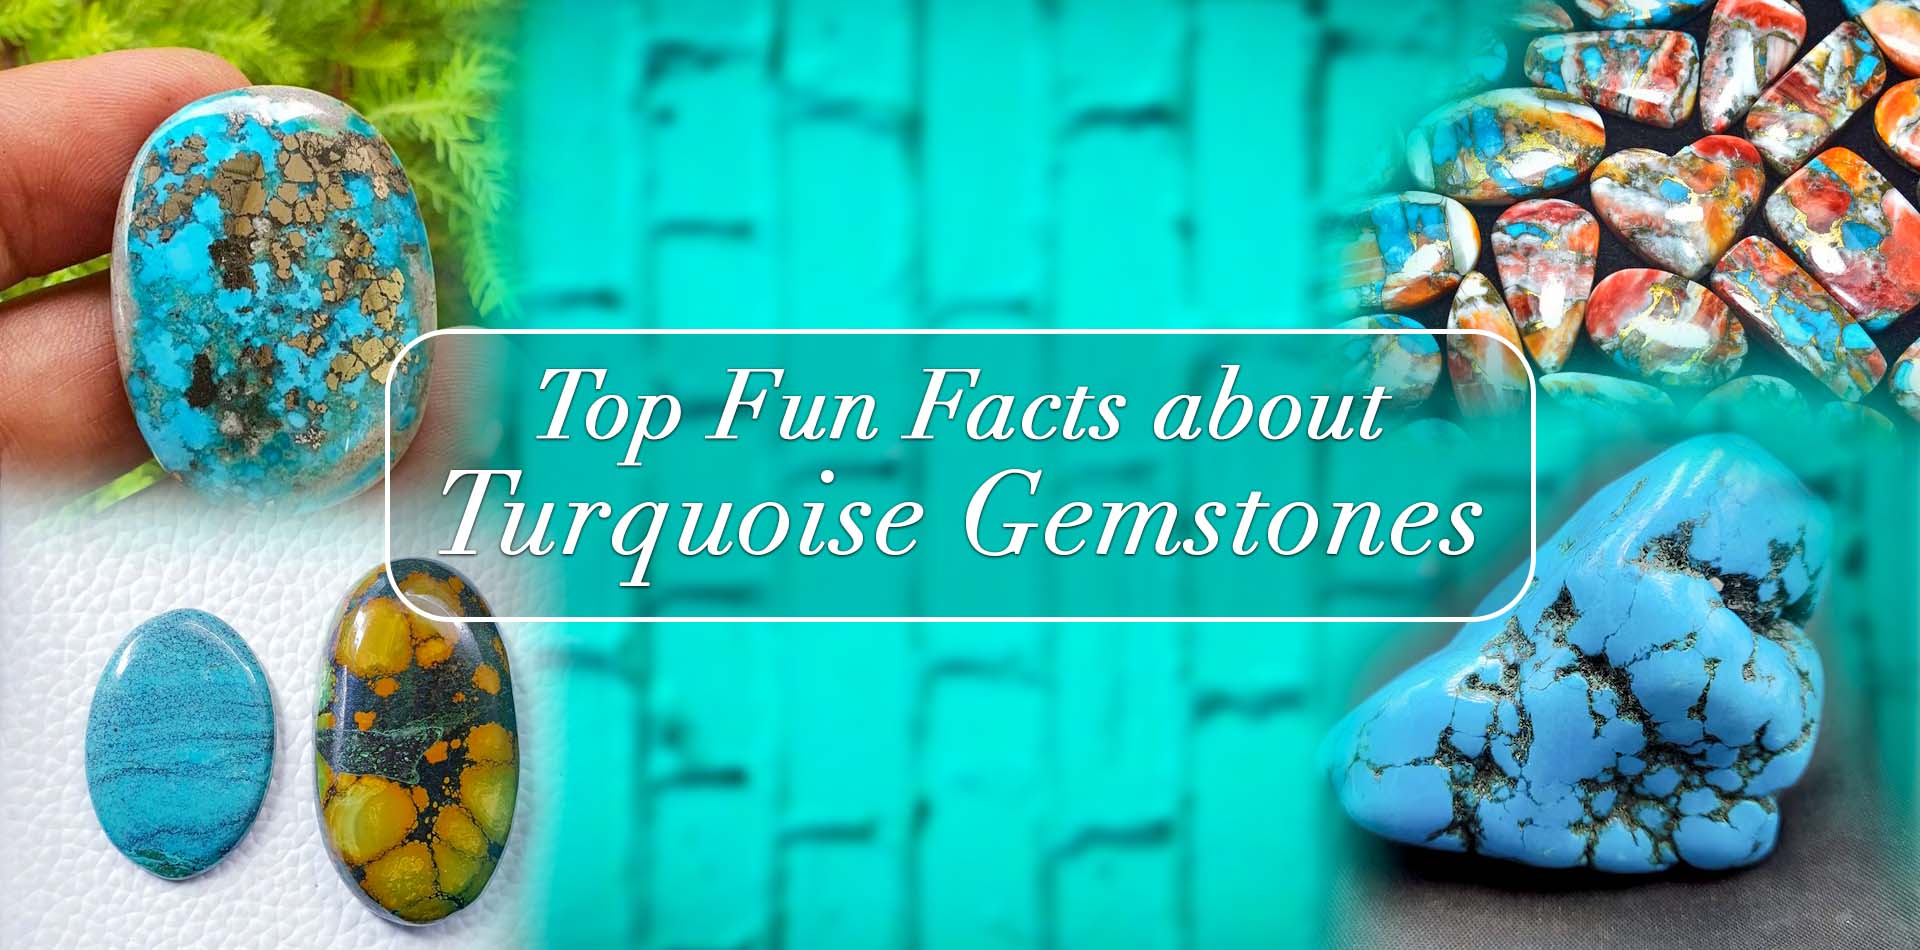 Top Fun Facts About Turquoise Stone